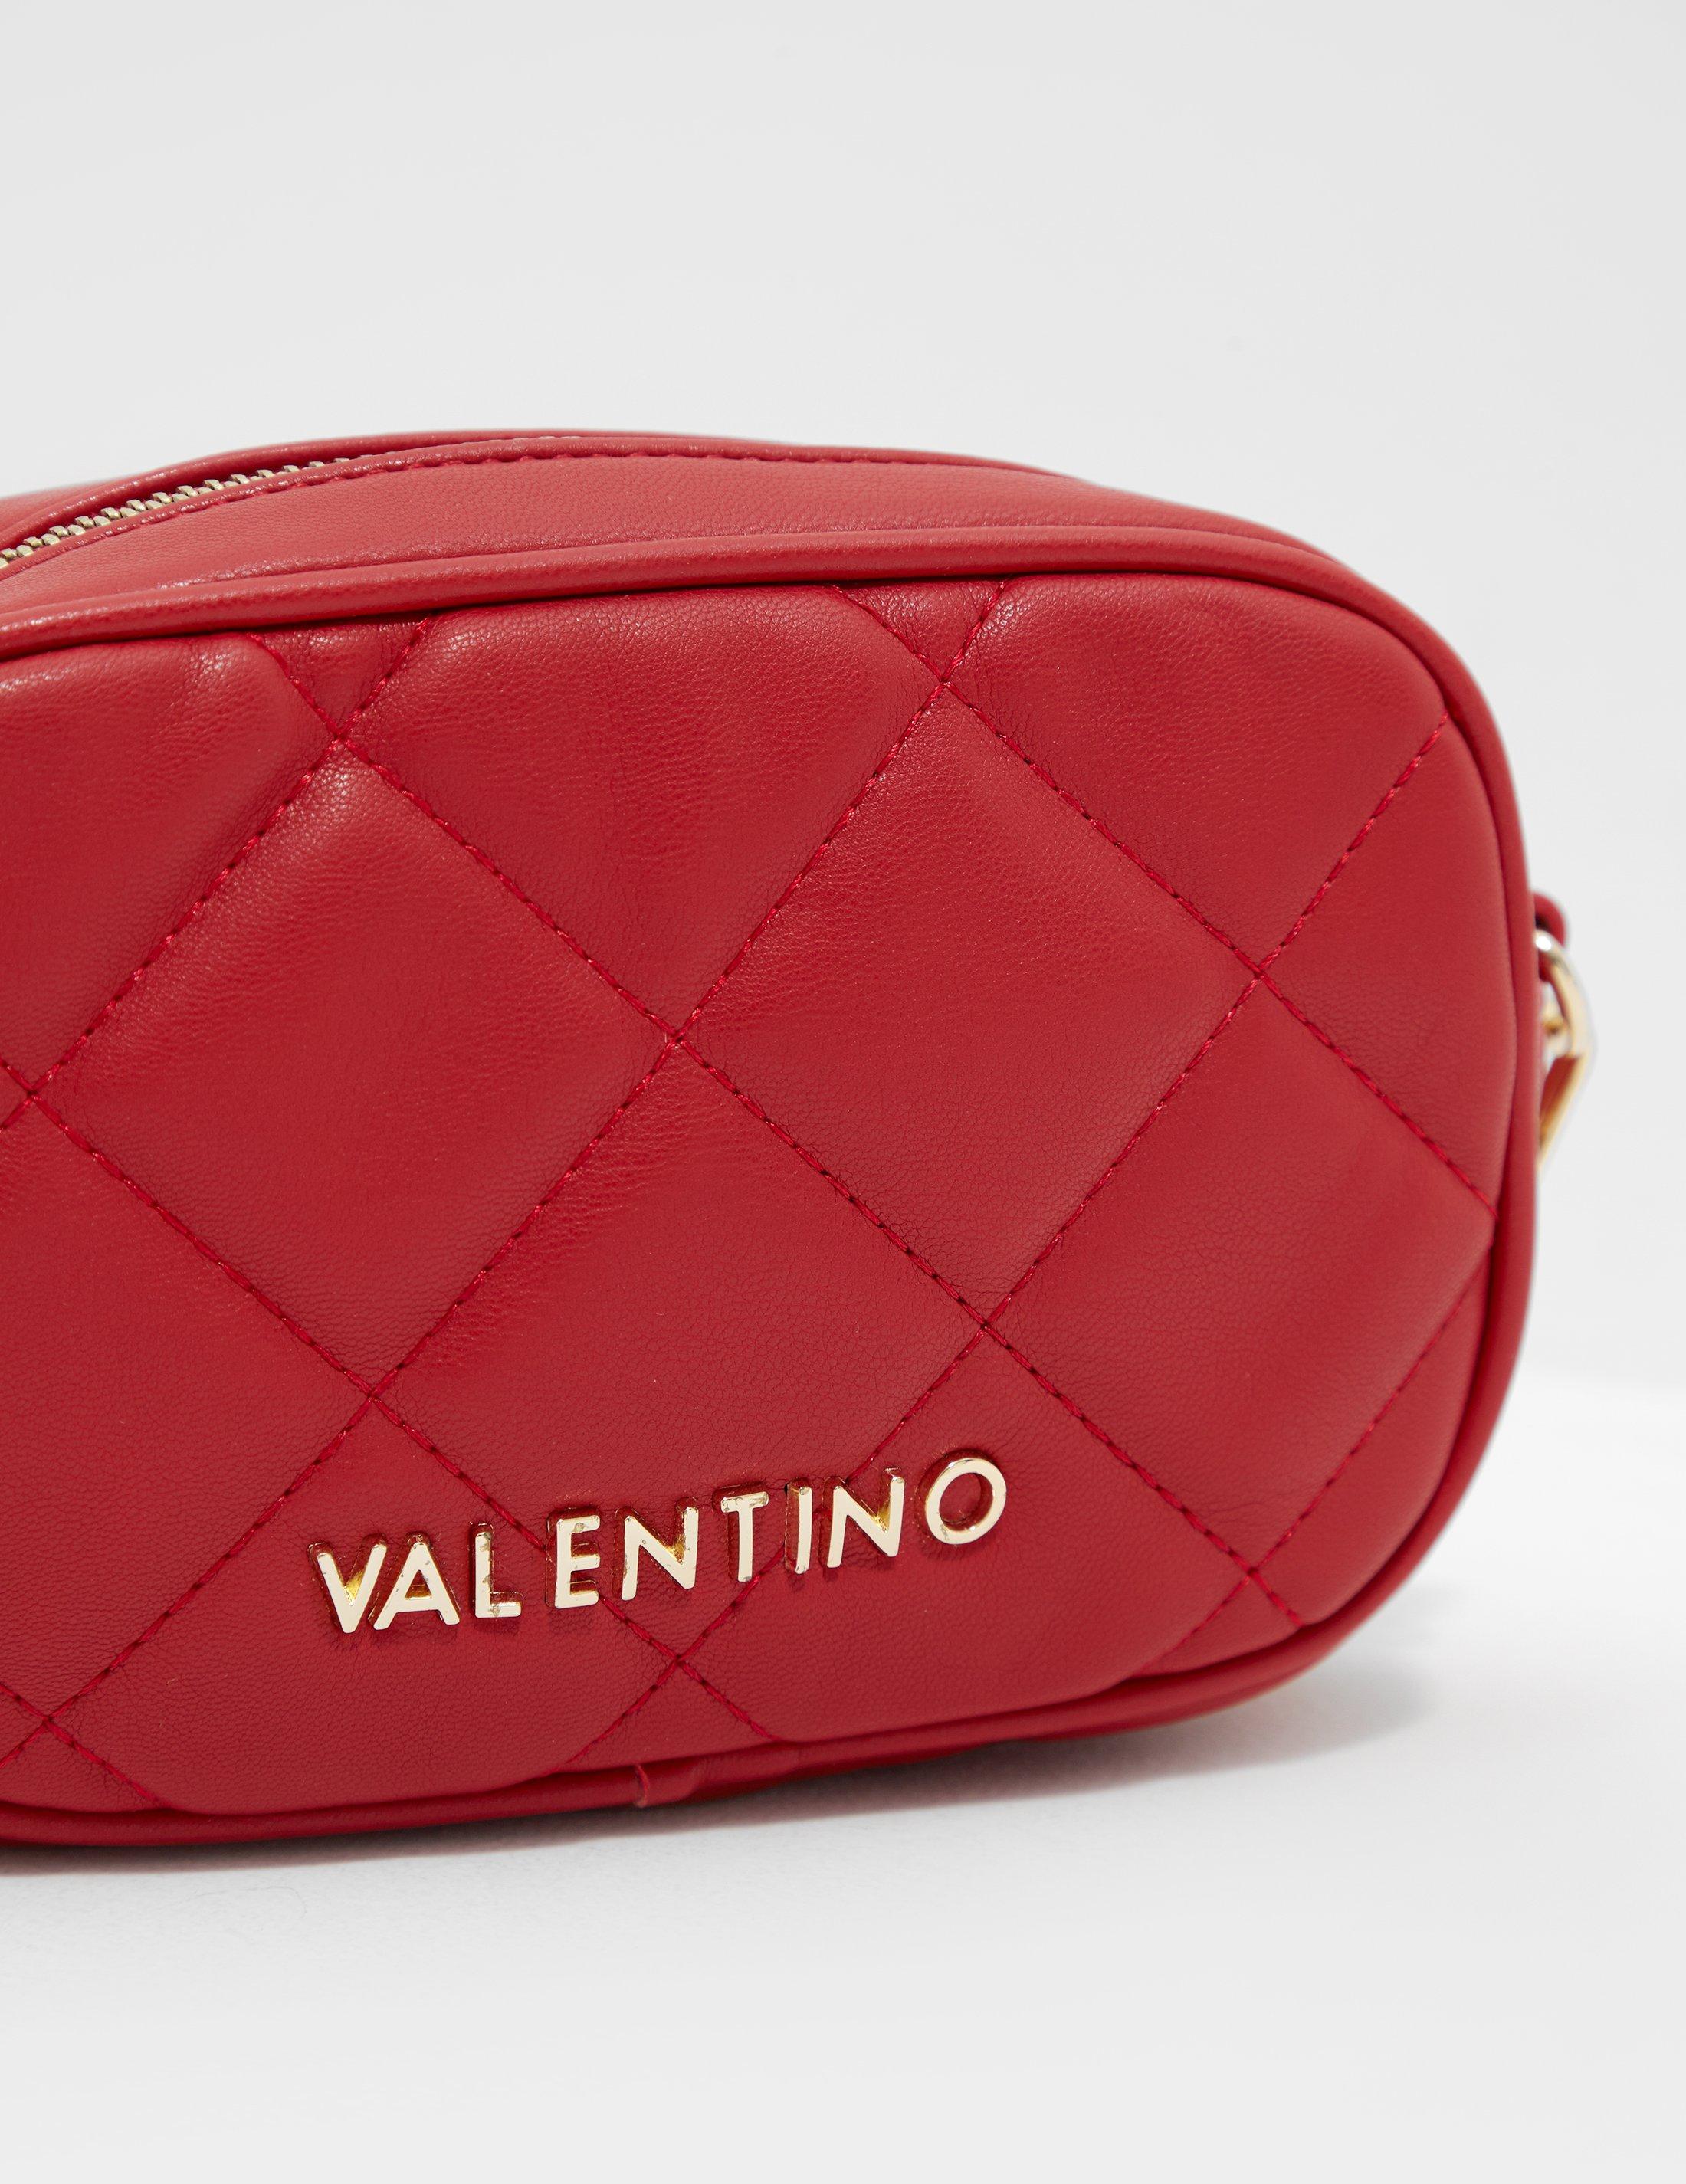 Valentino By Mario Valentino Leather Ocarina Shoulder Bag Red | Lyst